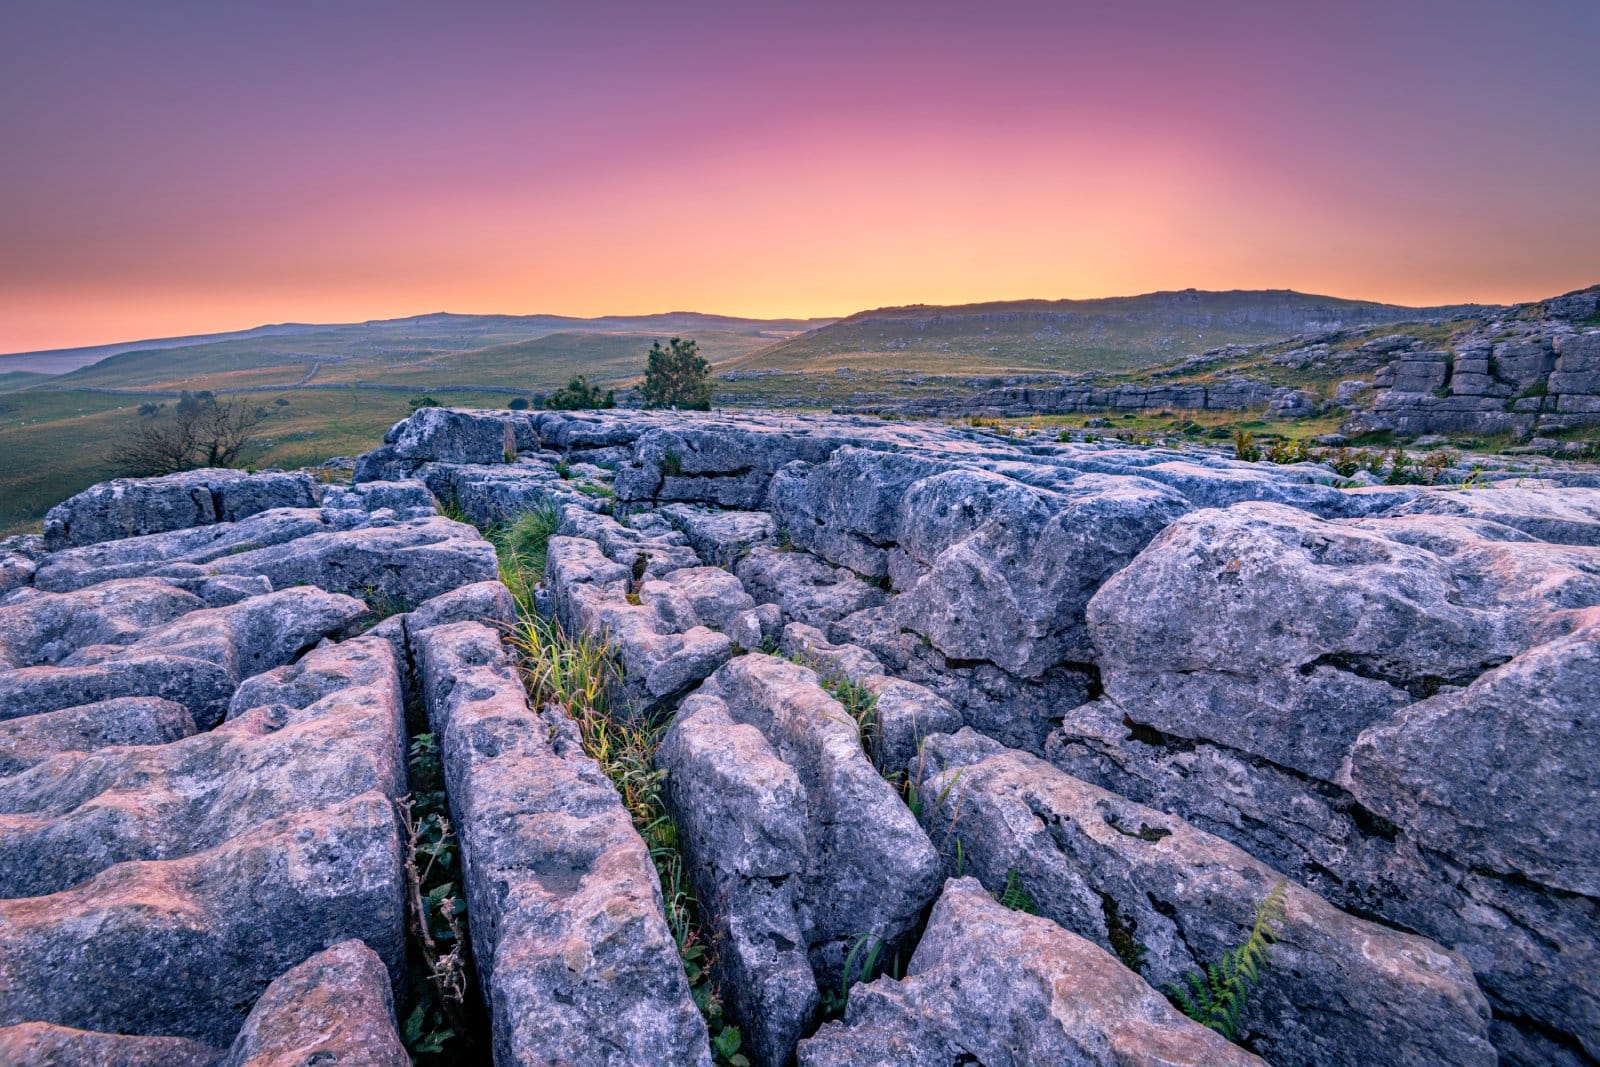 Image Credit: Shutterstock / Darrell Evans <p>Malham Cove offers stunning limestone pavements and cliff views. The climb is worth it, but sturdy footwear is a must to tackle its rugged beauty.</p>